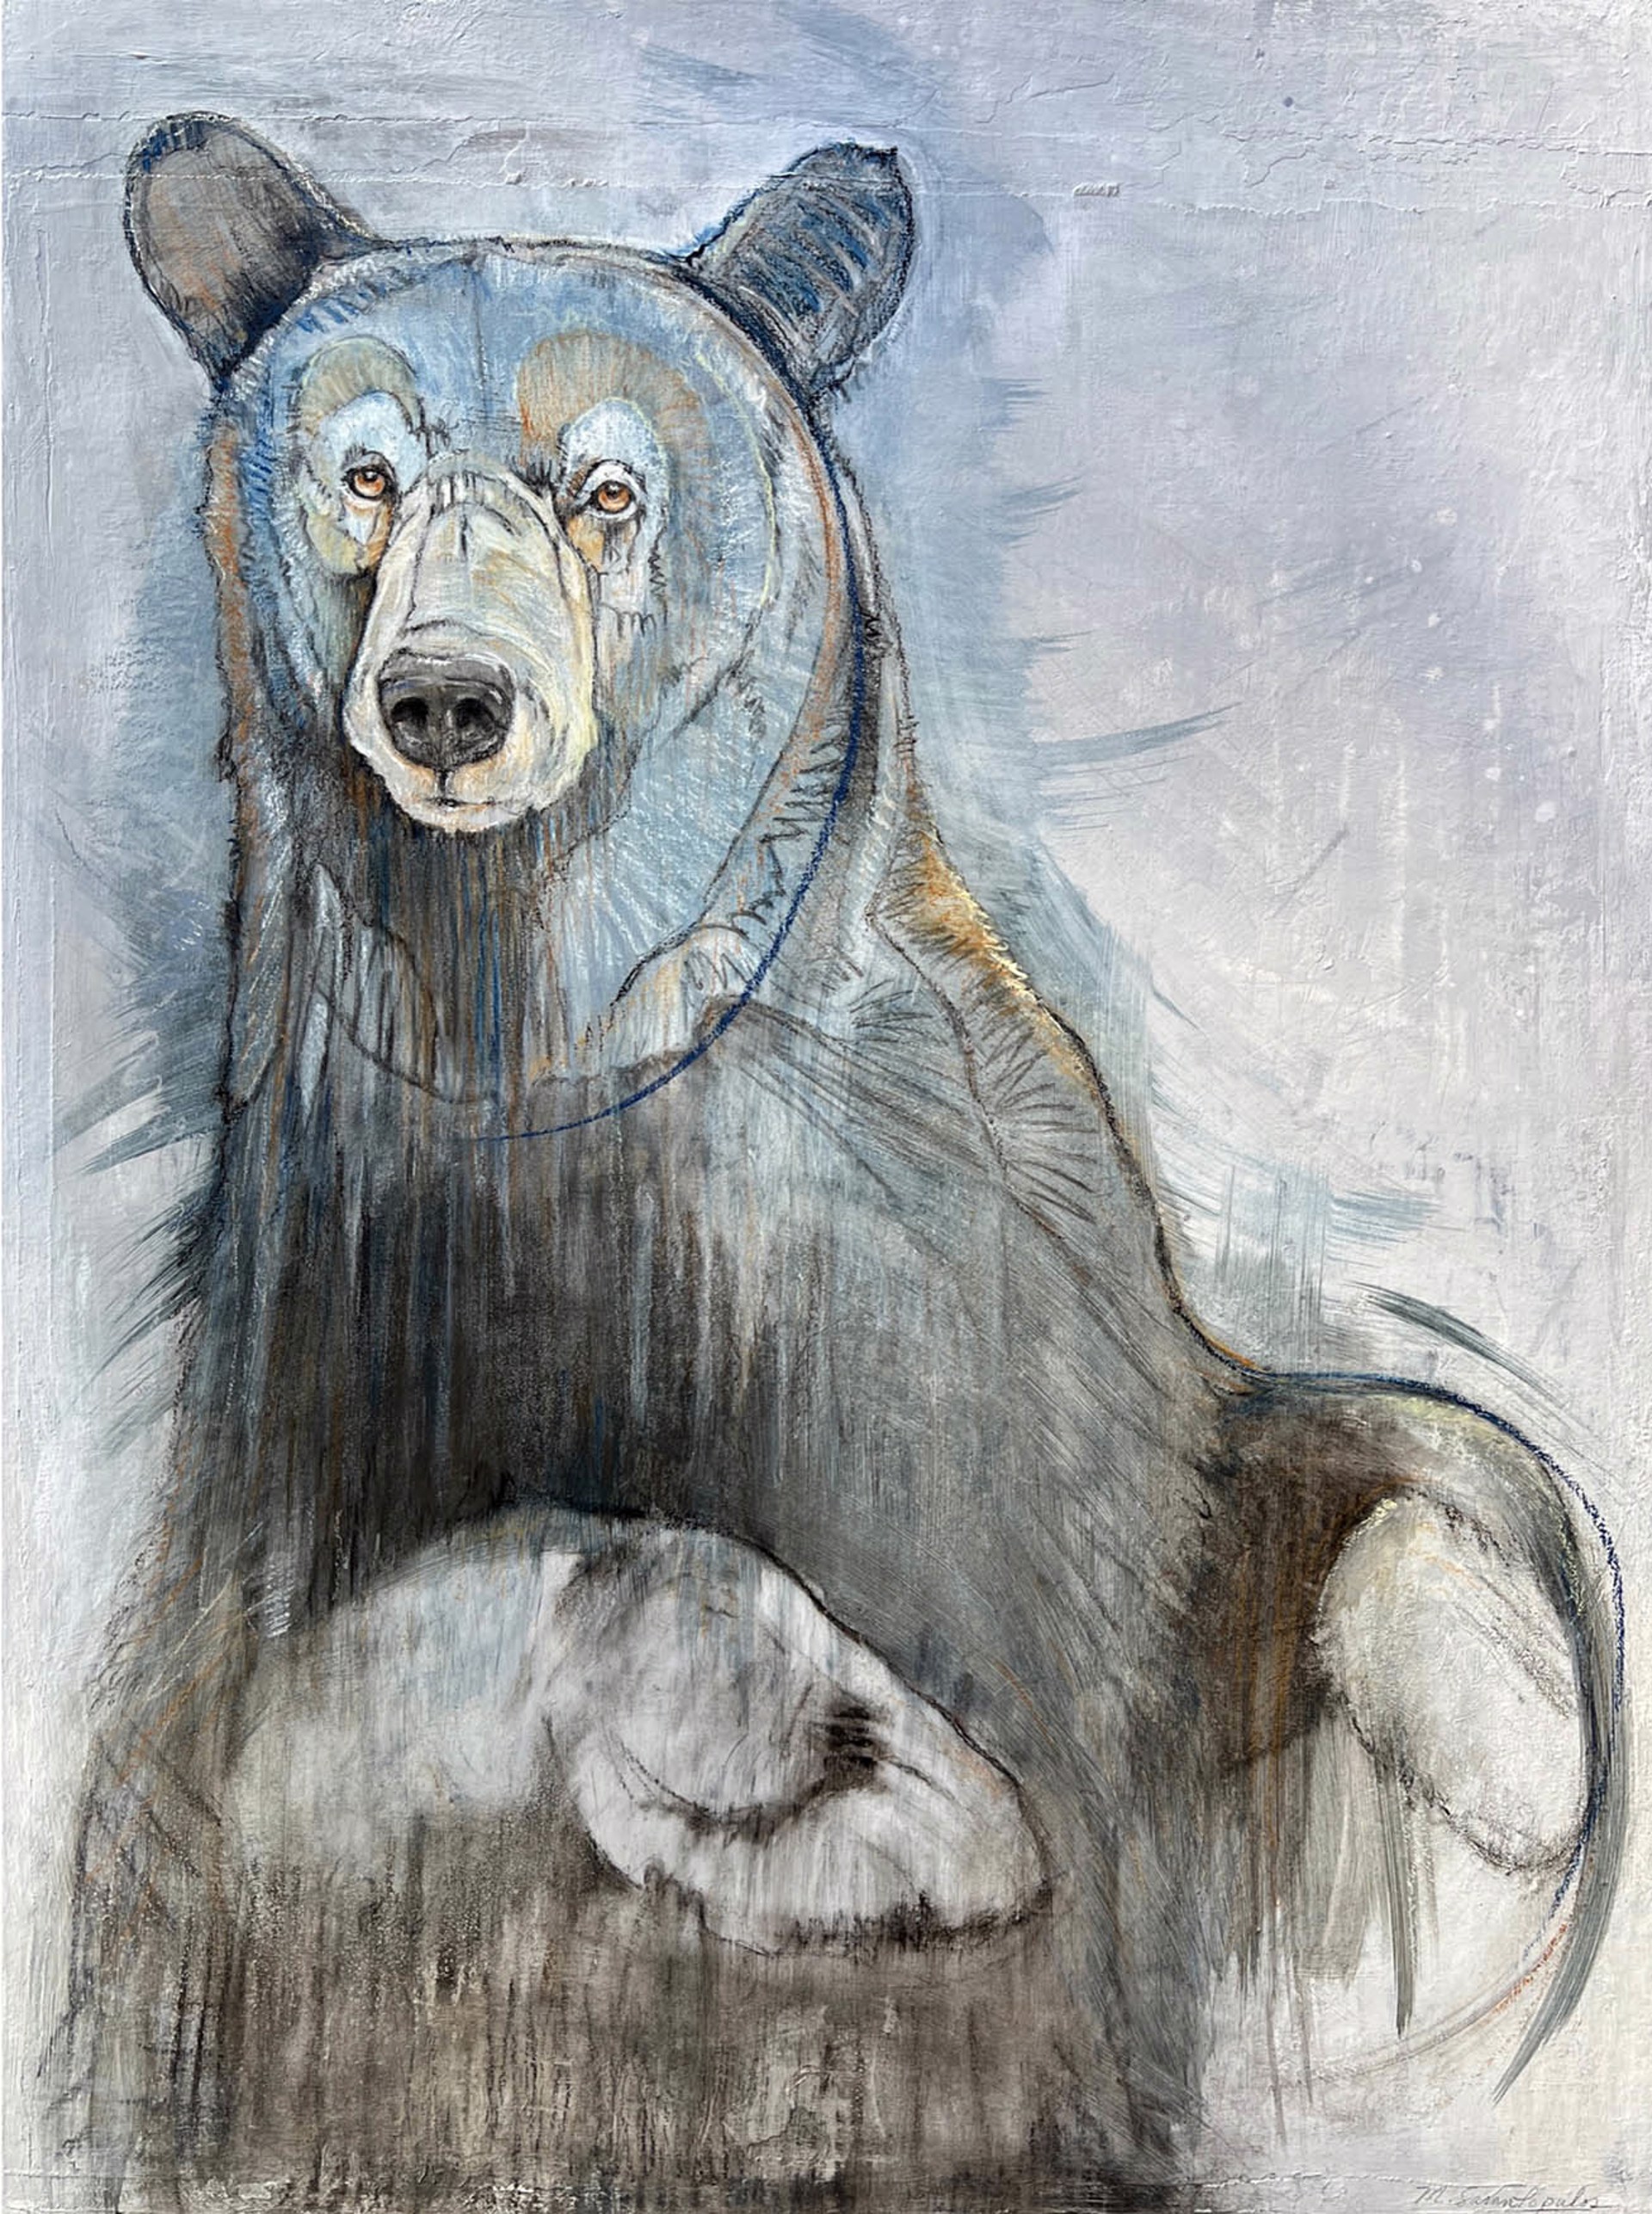 Original Mixed Media Painting Featuring A Standing Black Bear From The Waist Up Sketched On Top Of Abstract Background In Blues And Grey